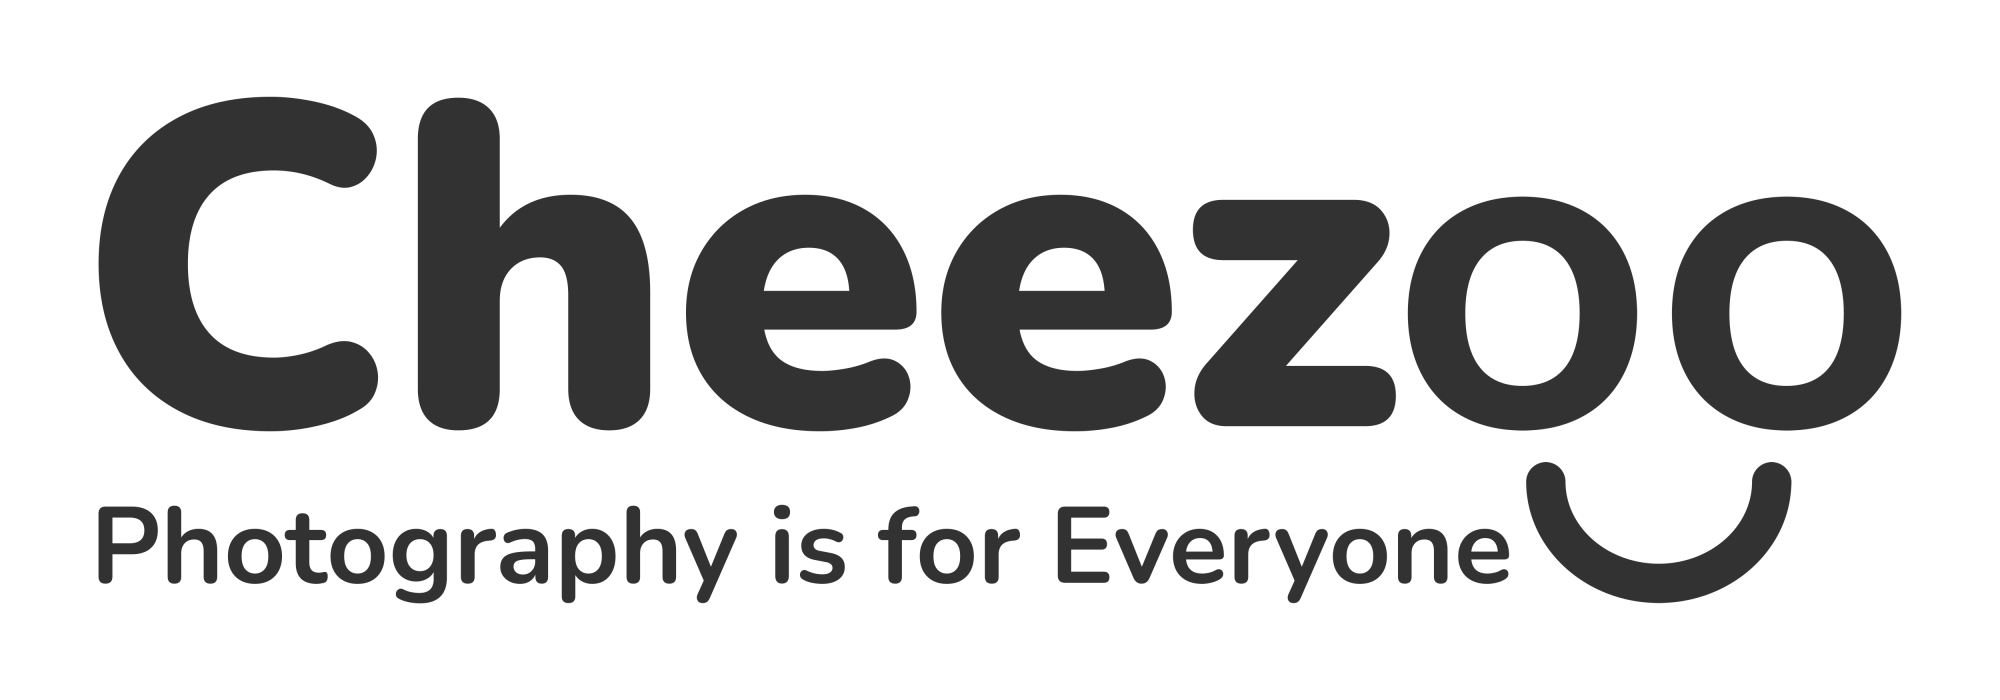 Cheezoo – Photography is for Everyone